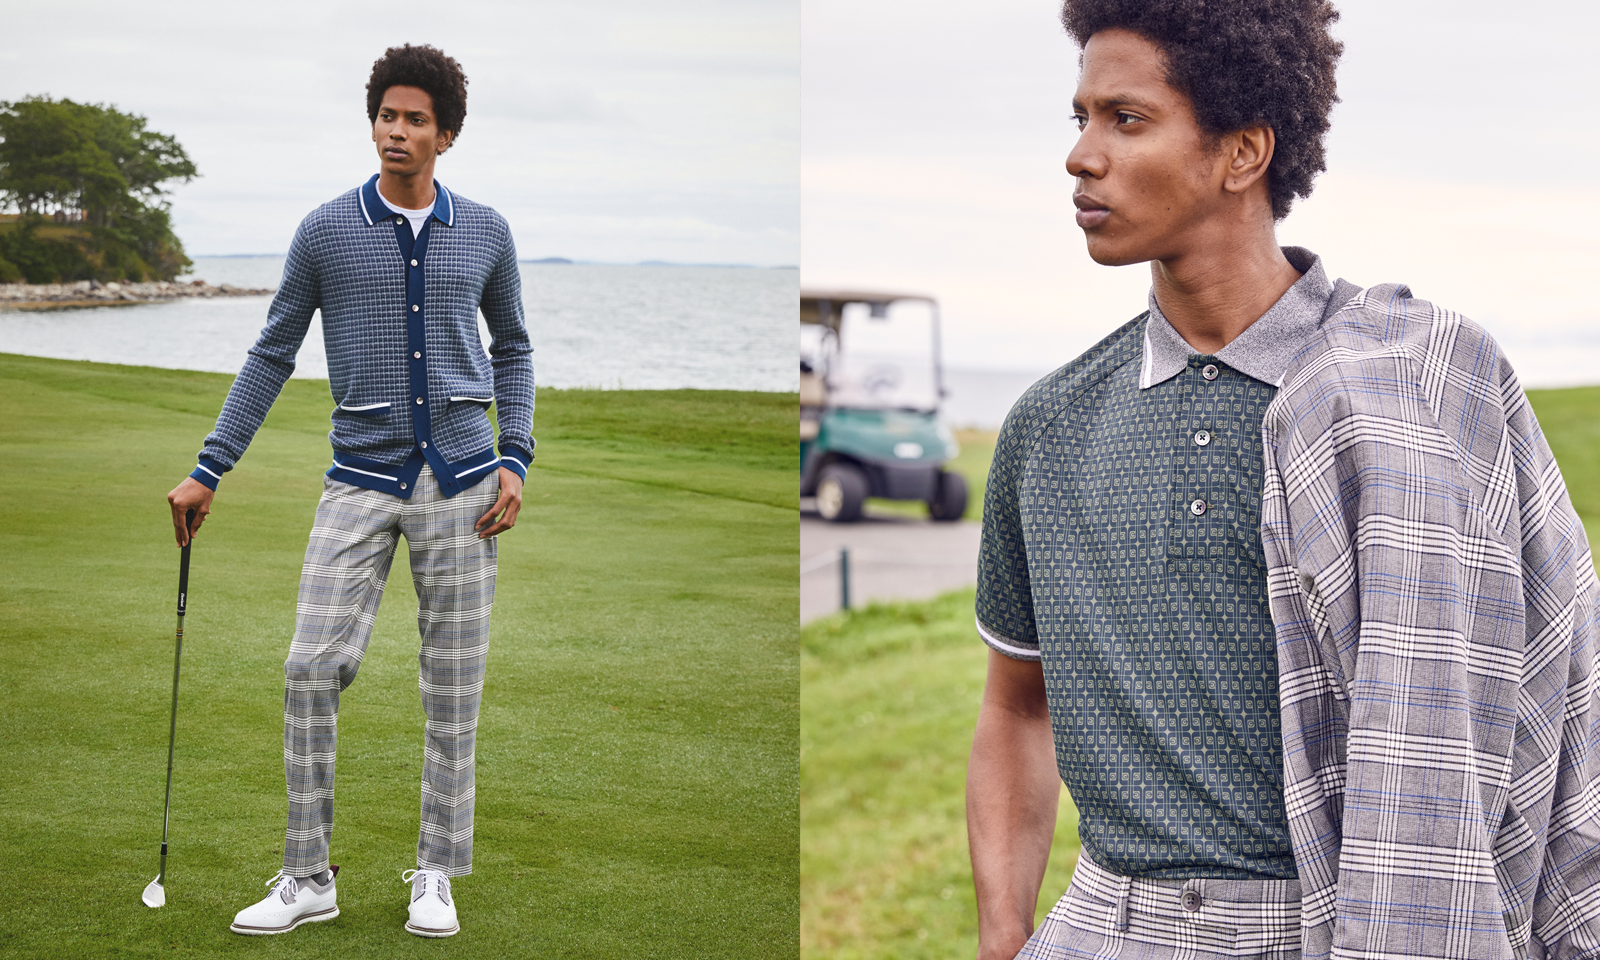 The Links Collection from designer Todd Snyder and FootJoy